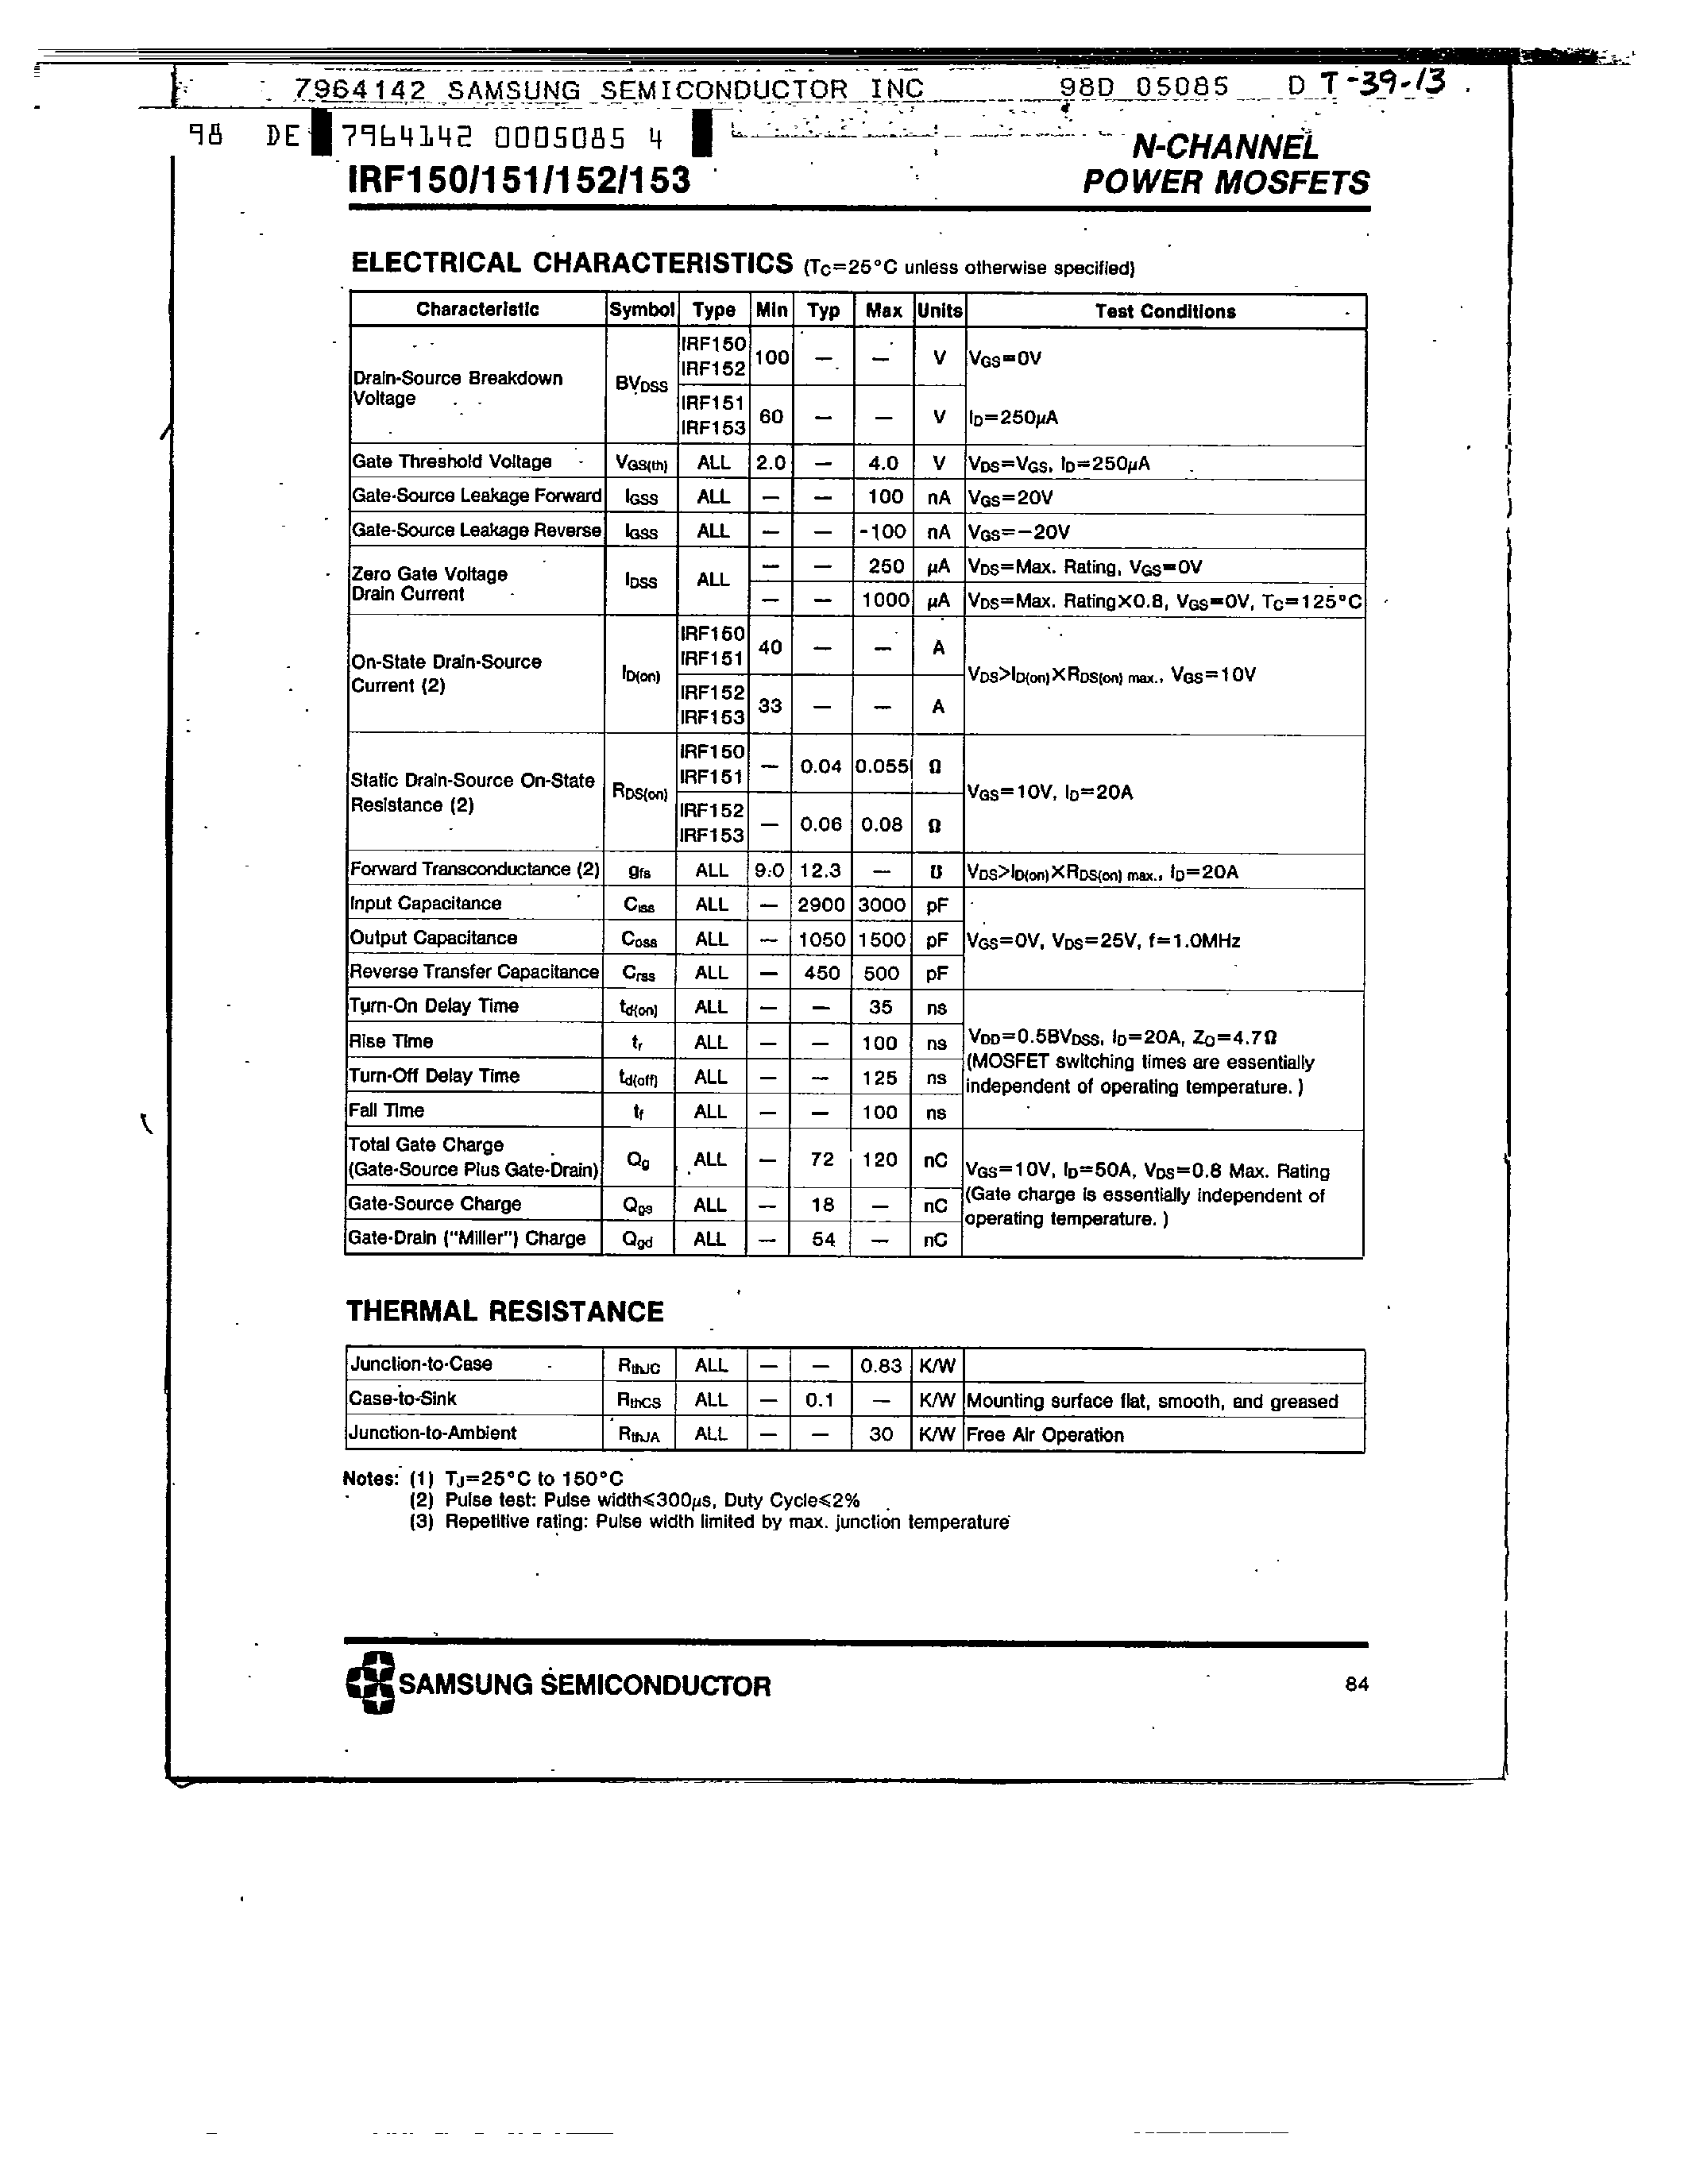 Datasheet IRF152 - N-CHANNEL POWER MOSFETS page 2